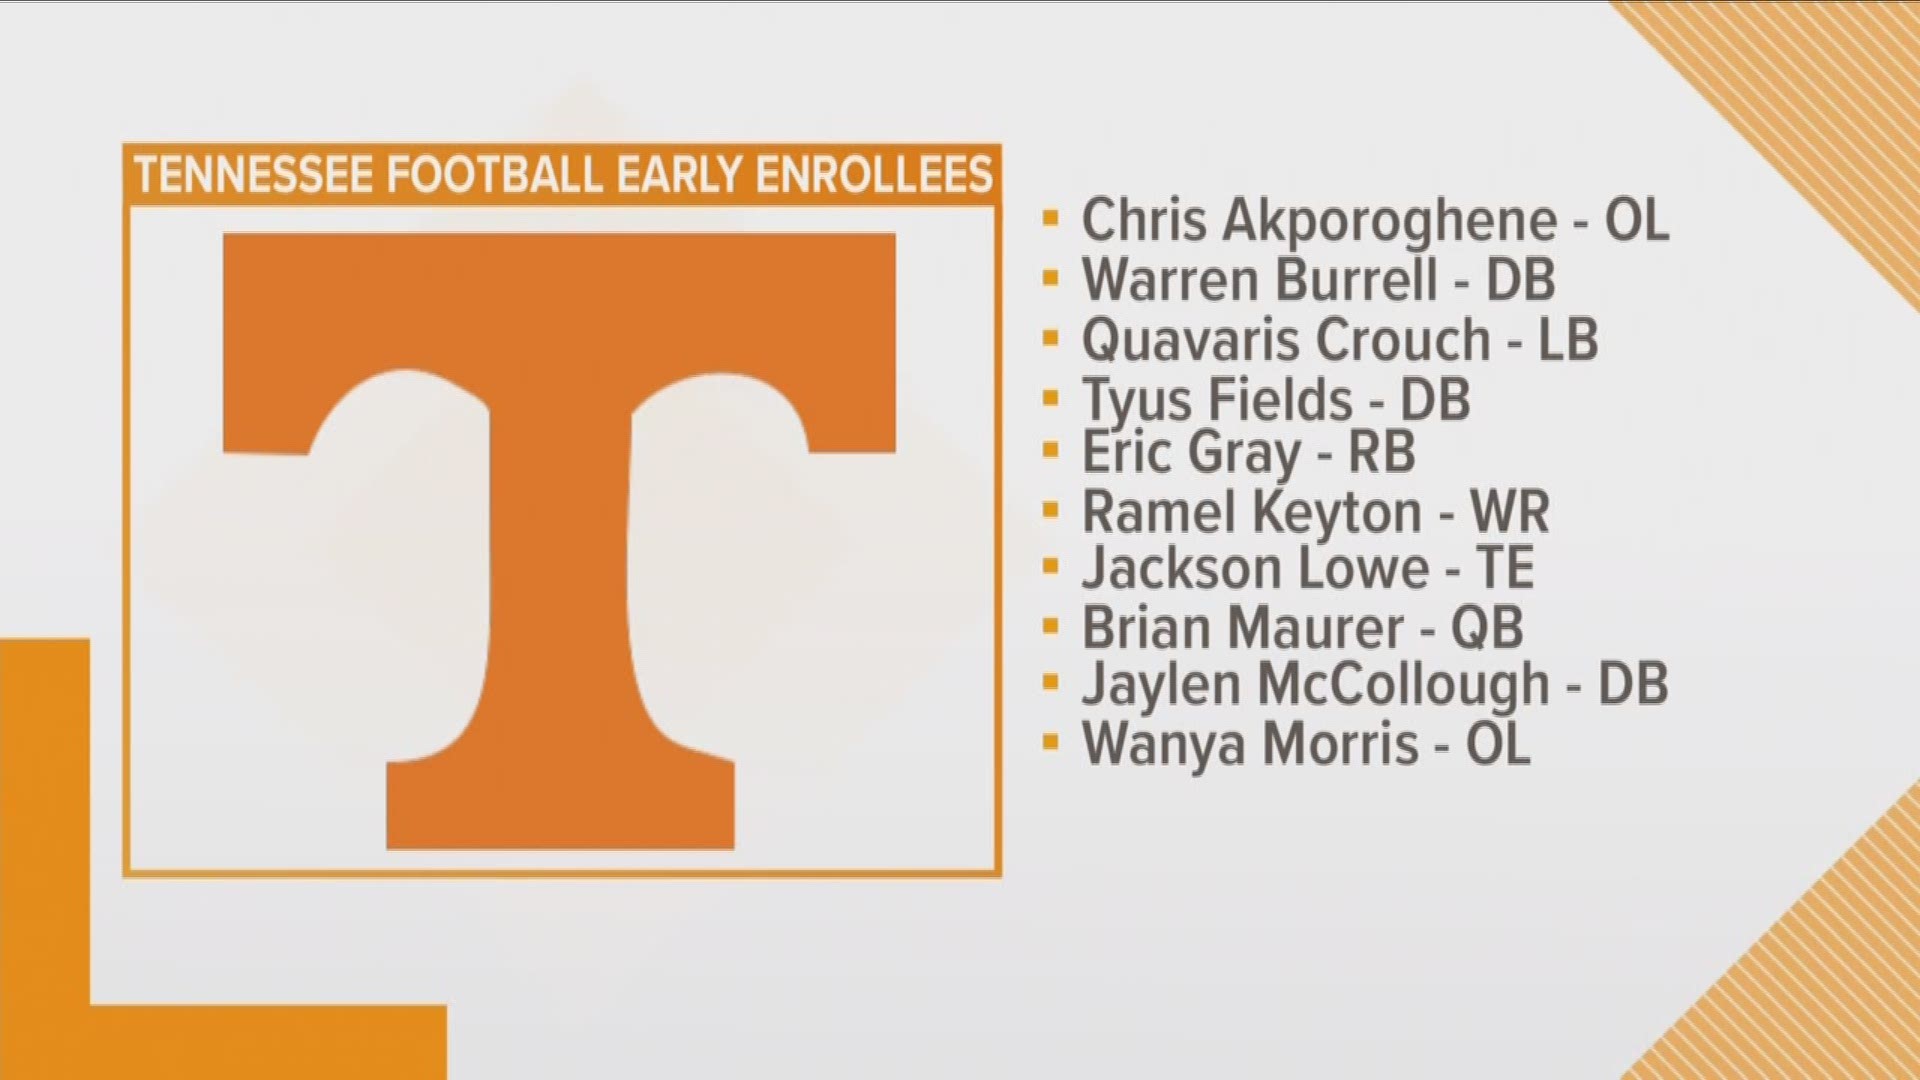 Here's a look at the first year players coming to Rocky Top for the spring.